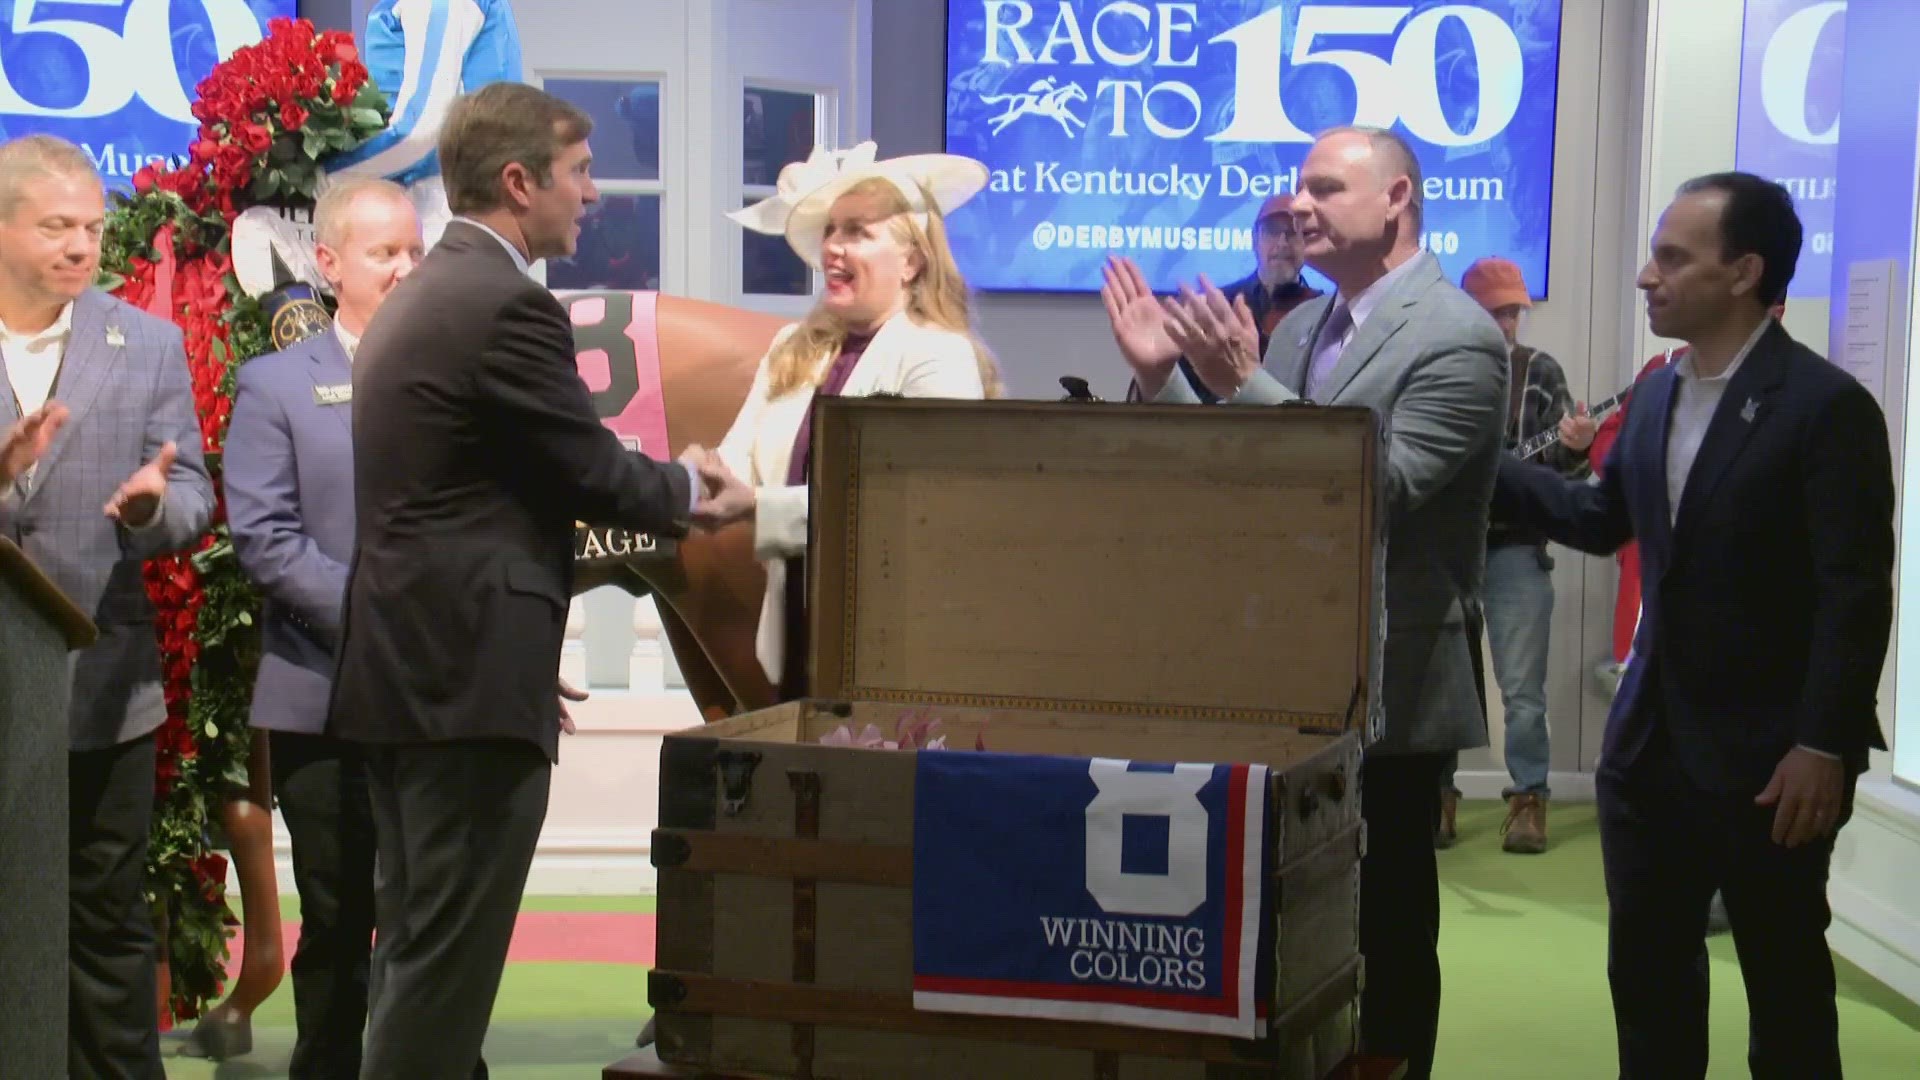 State leaders visited Churchill Downs to celebrate the milestone race all day on Wednesday.